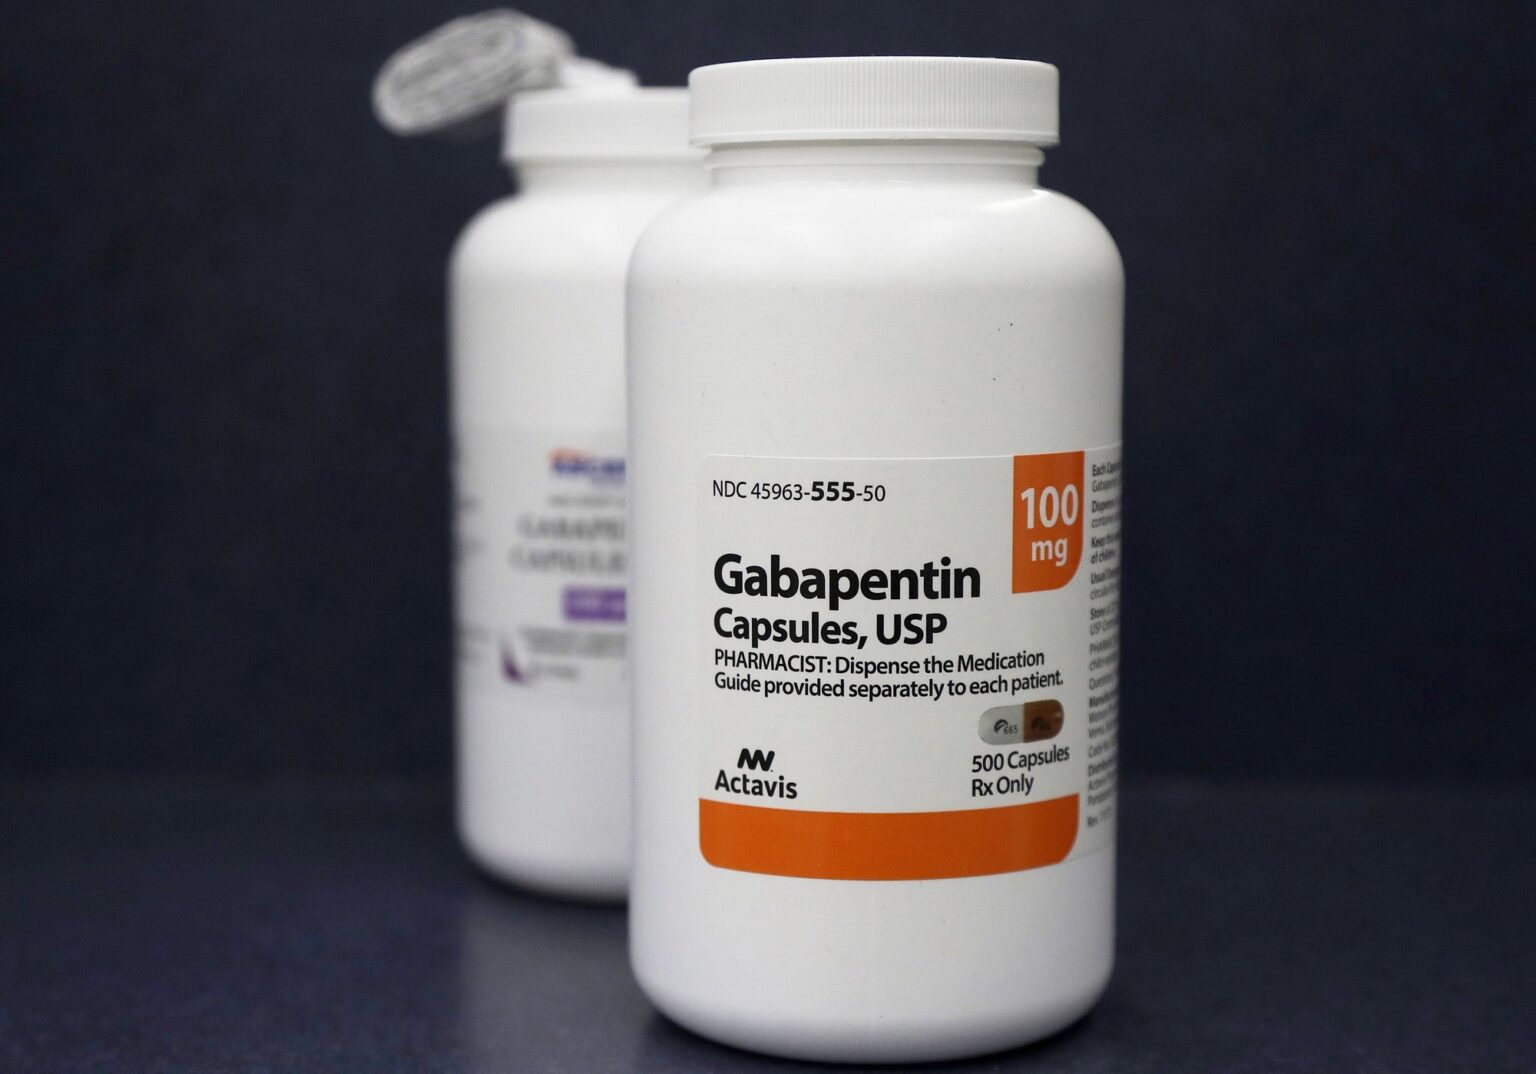 There are more and more doctors prescribing Gabapentin every day, but what does it actually do? Learn everything you need to know about the drug right here.